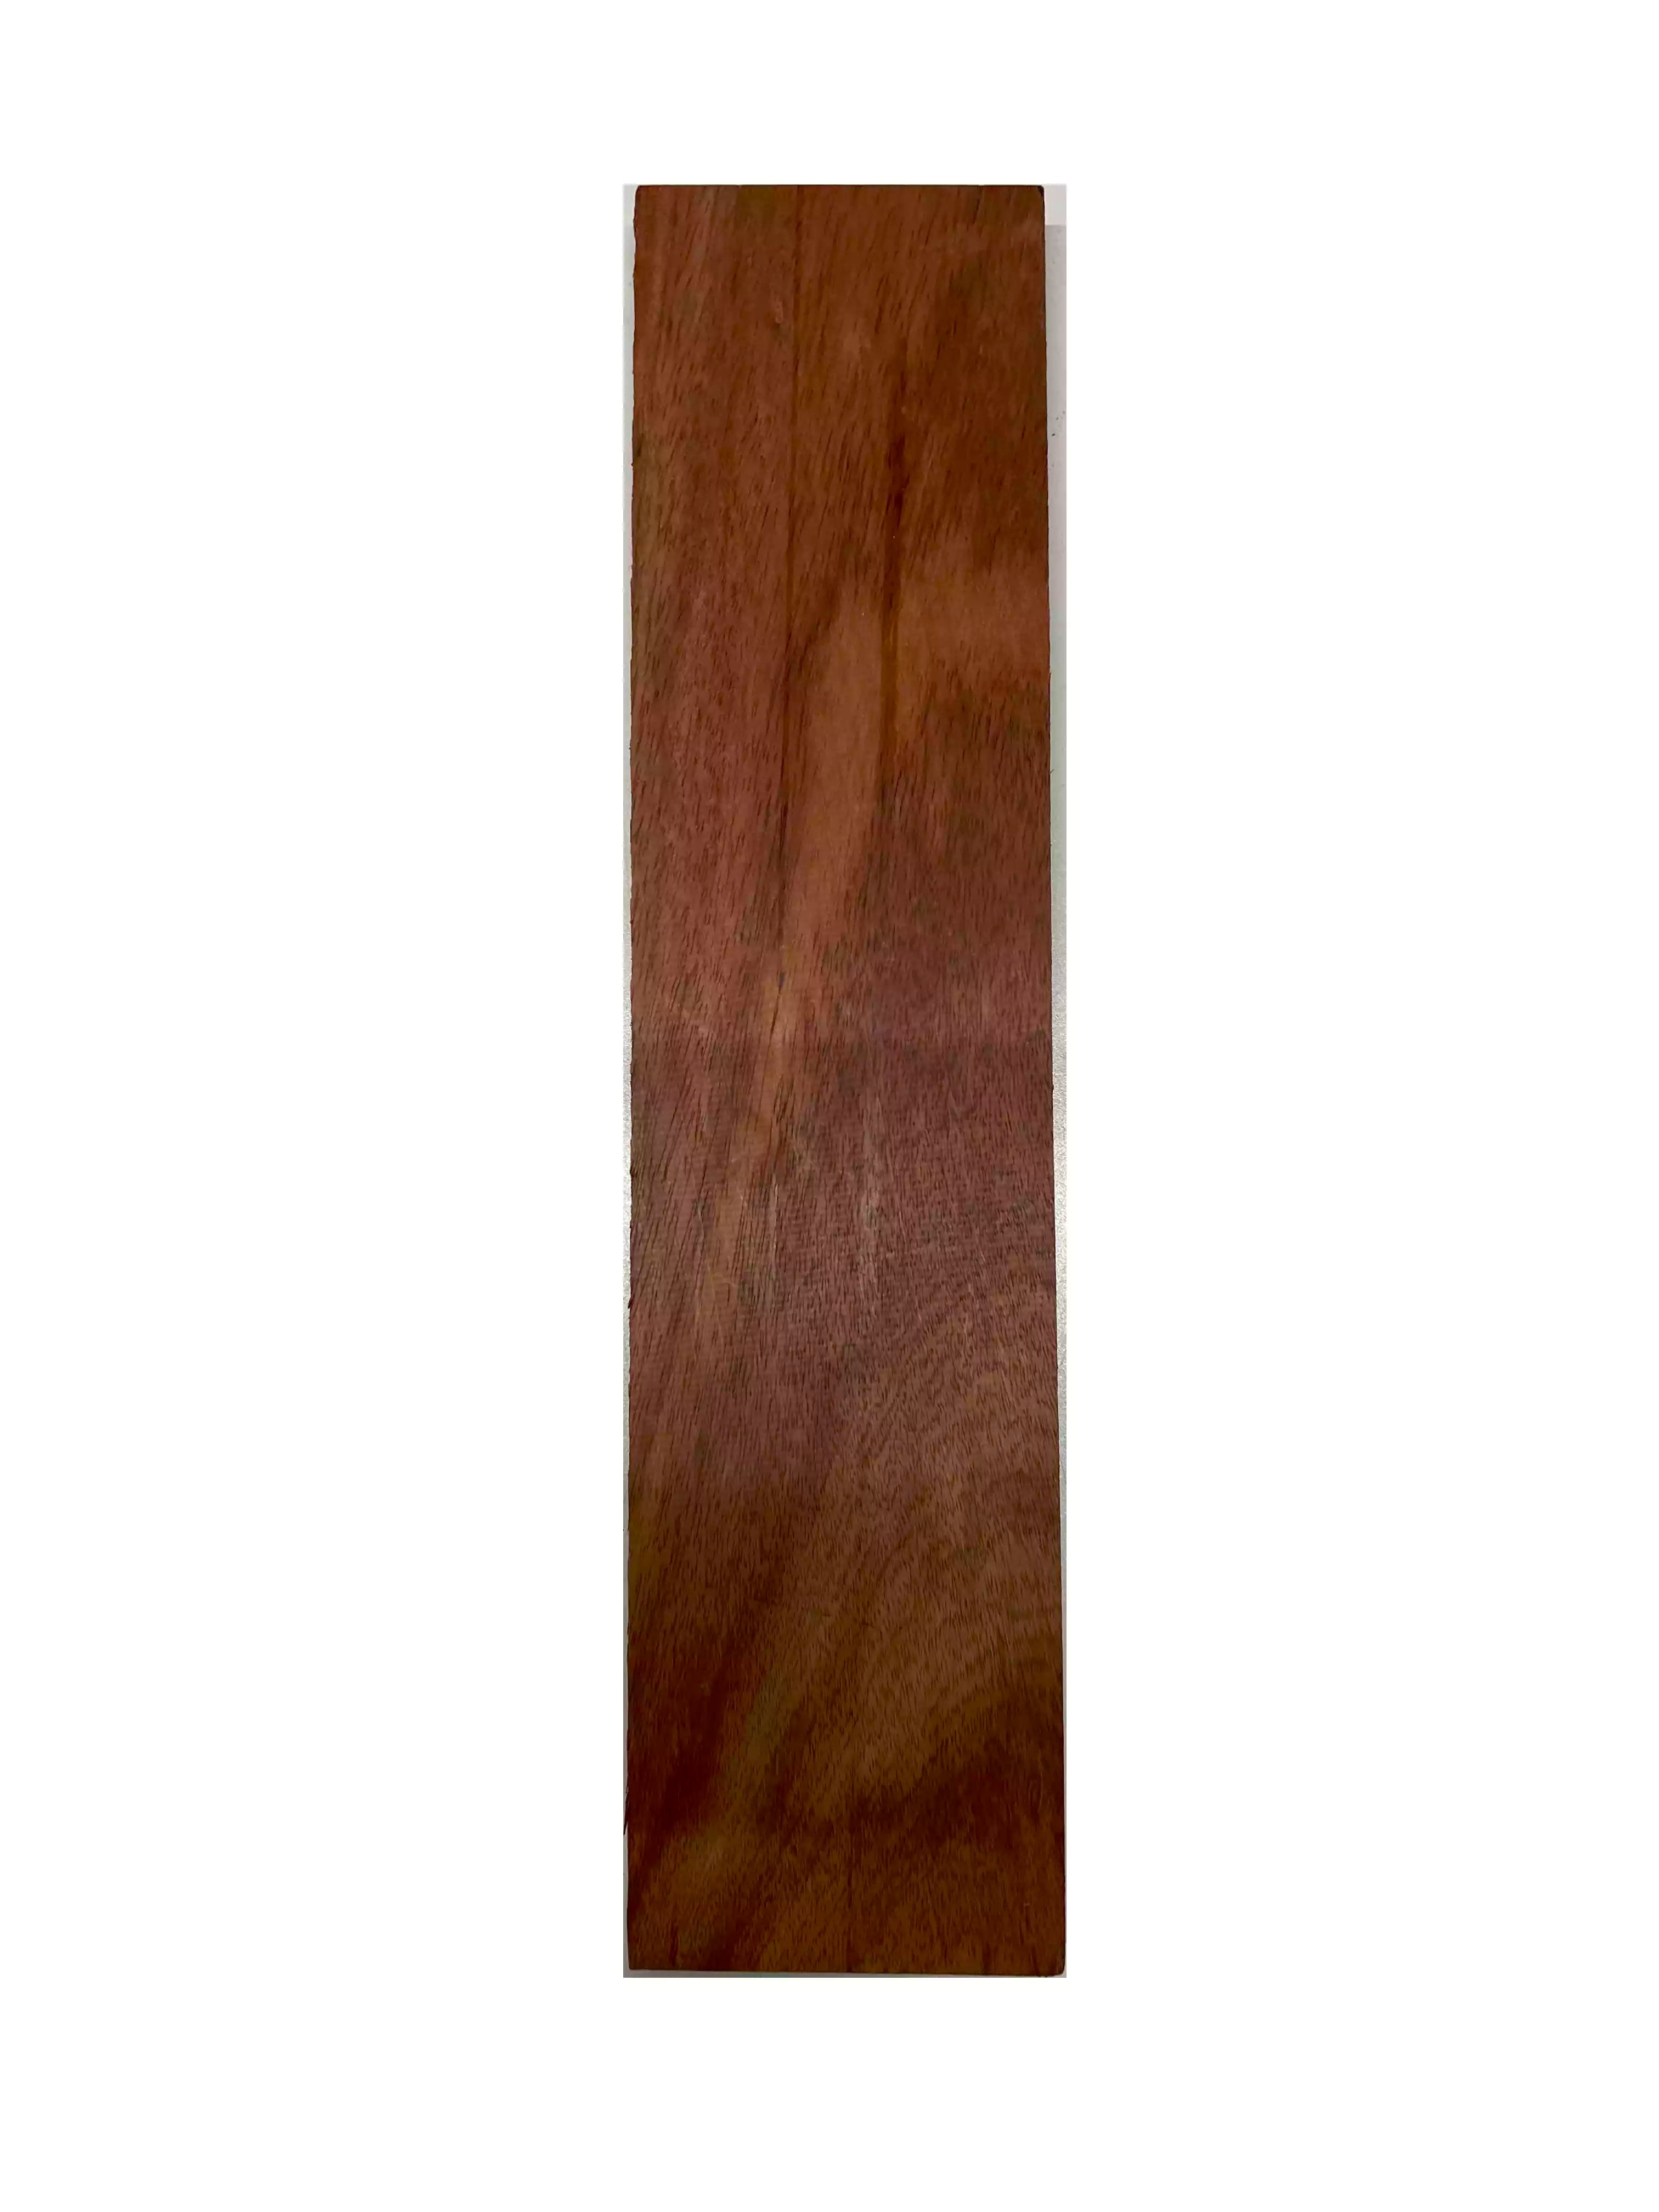 Bloodwood Thin Stock Three Dimensional Lumber Board 16&quot; x 3-7/8&quot; x 3/4&quot; 